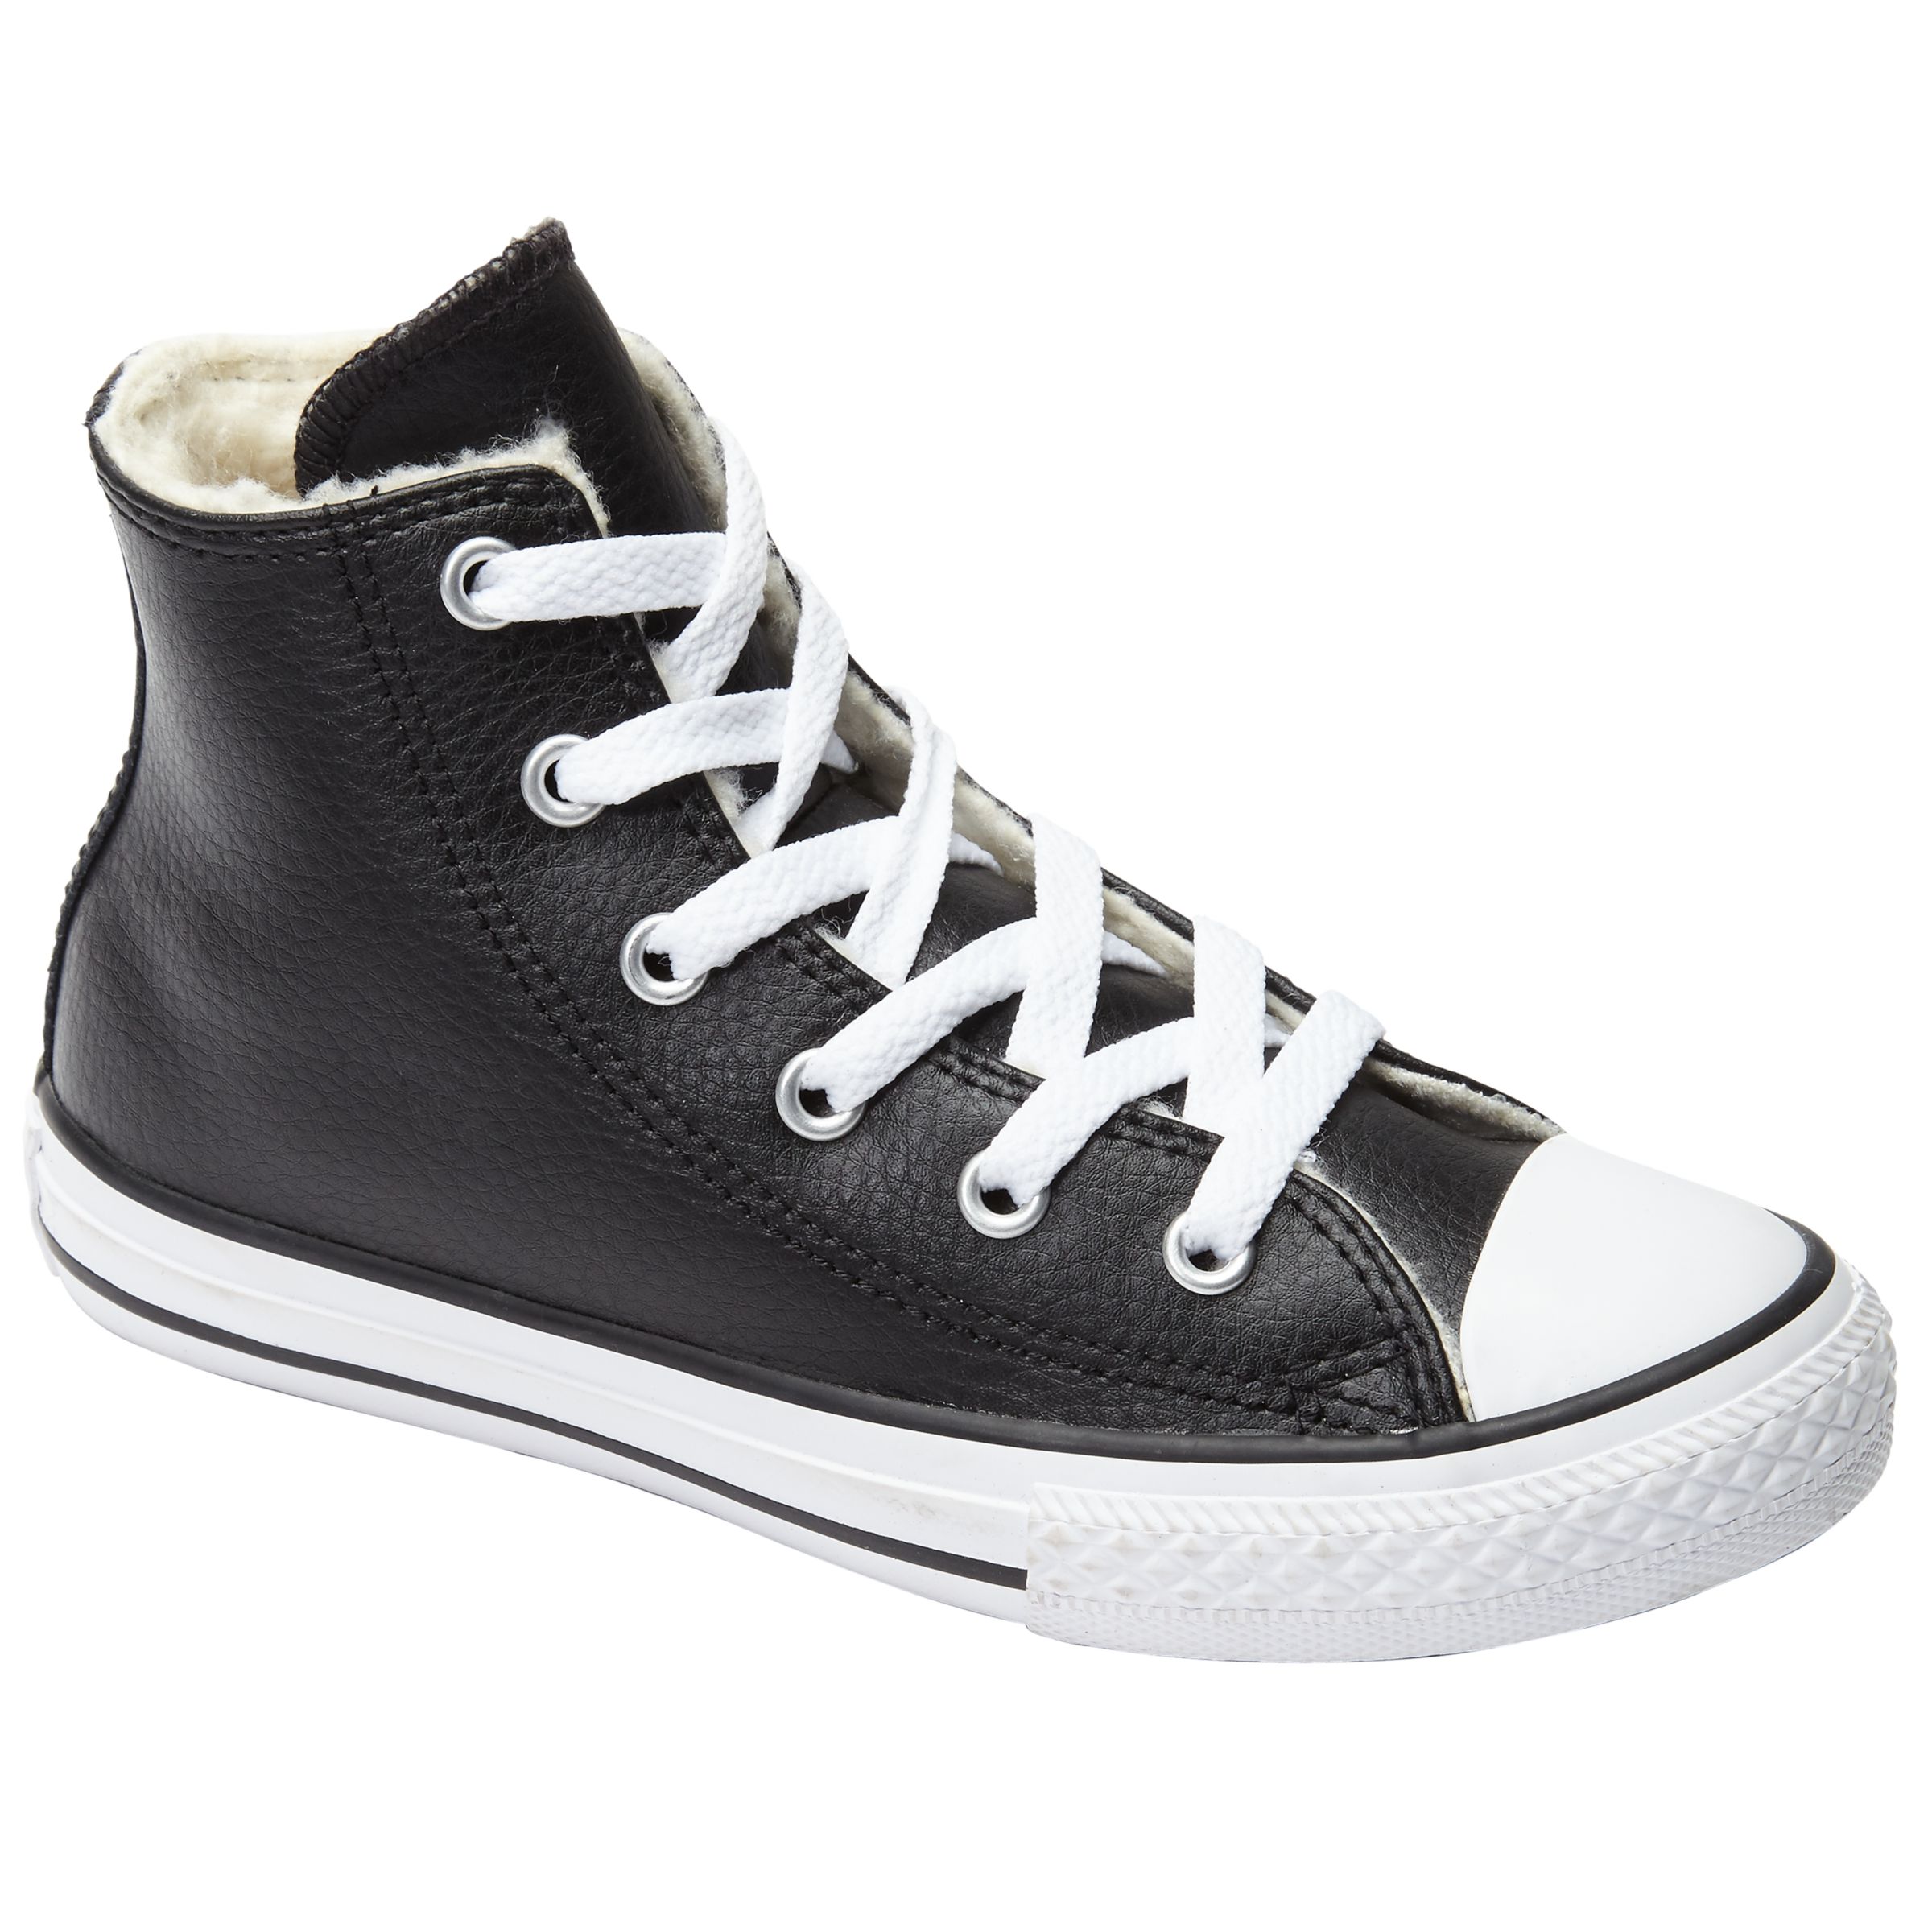 sherpa lined converse sneakers